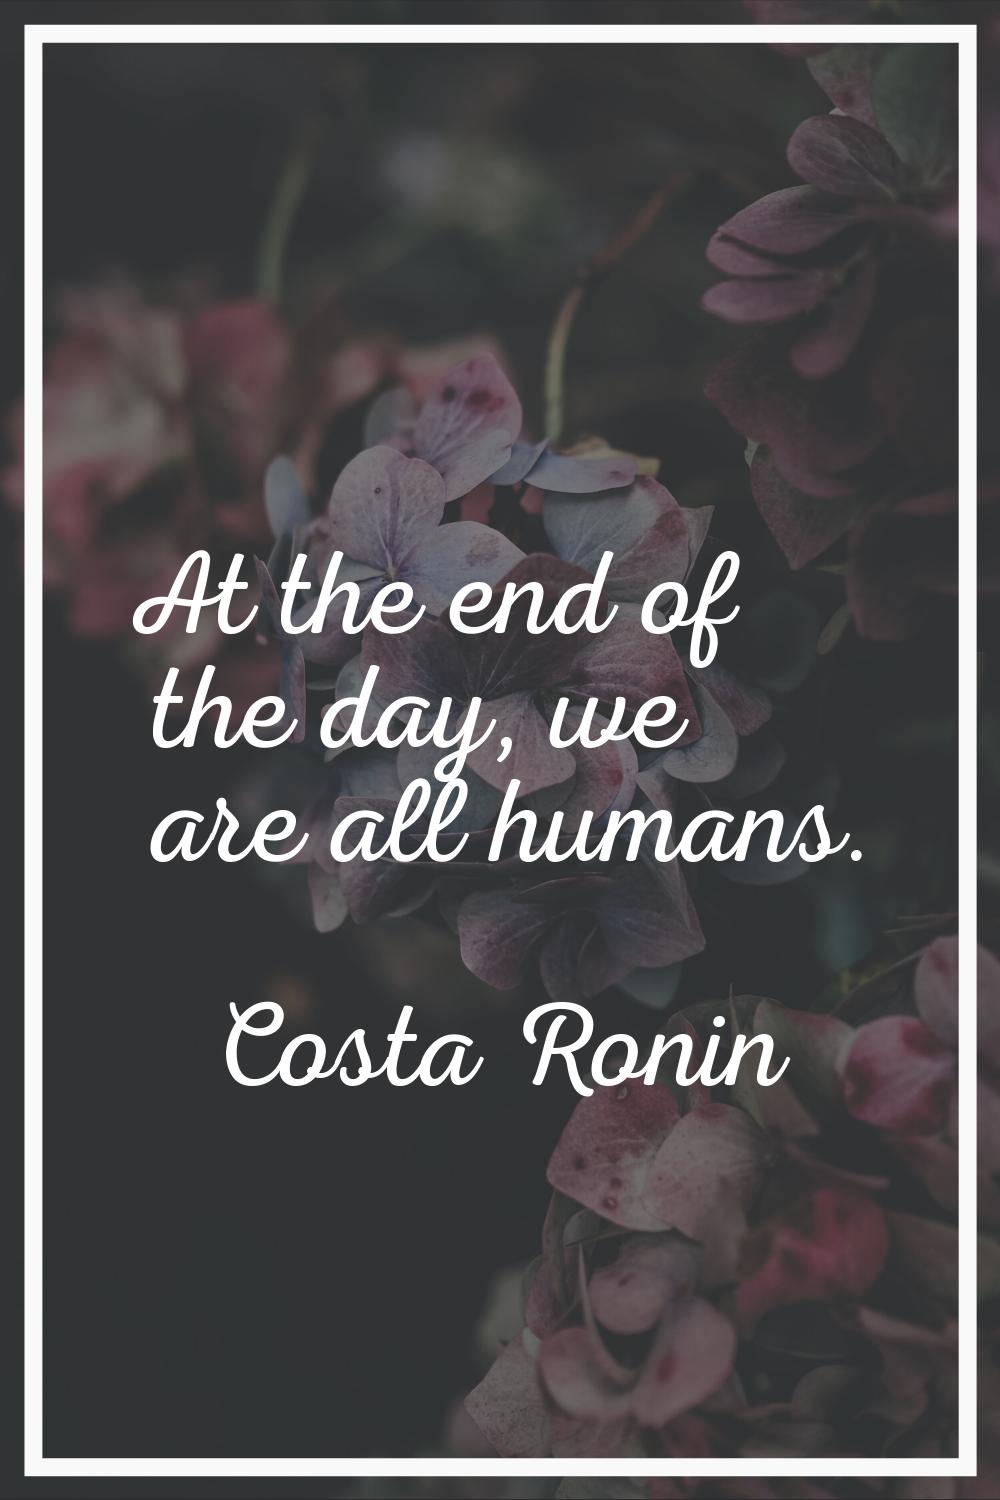 At the end of the day, we are all humans.